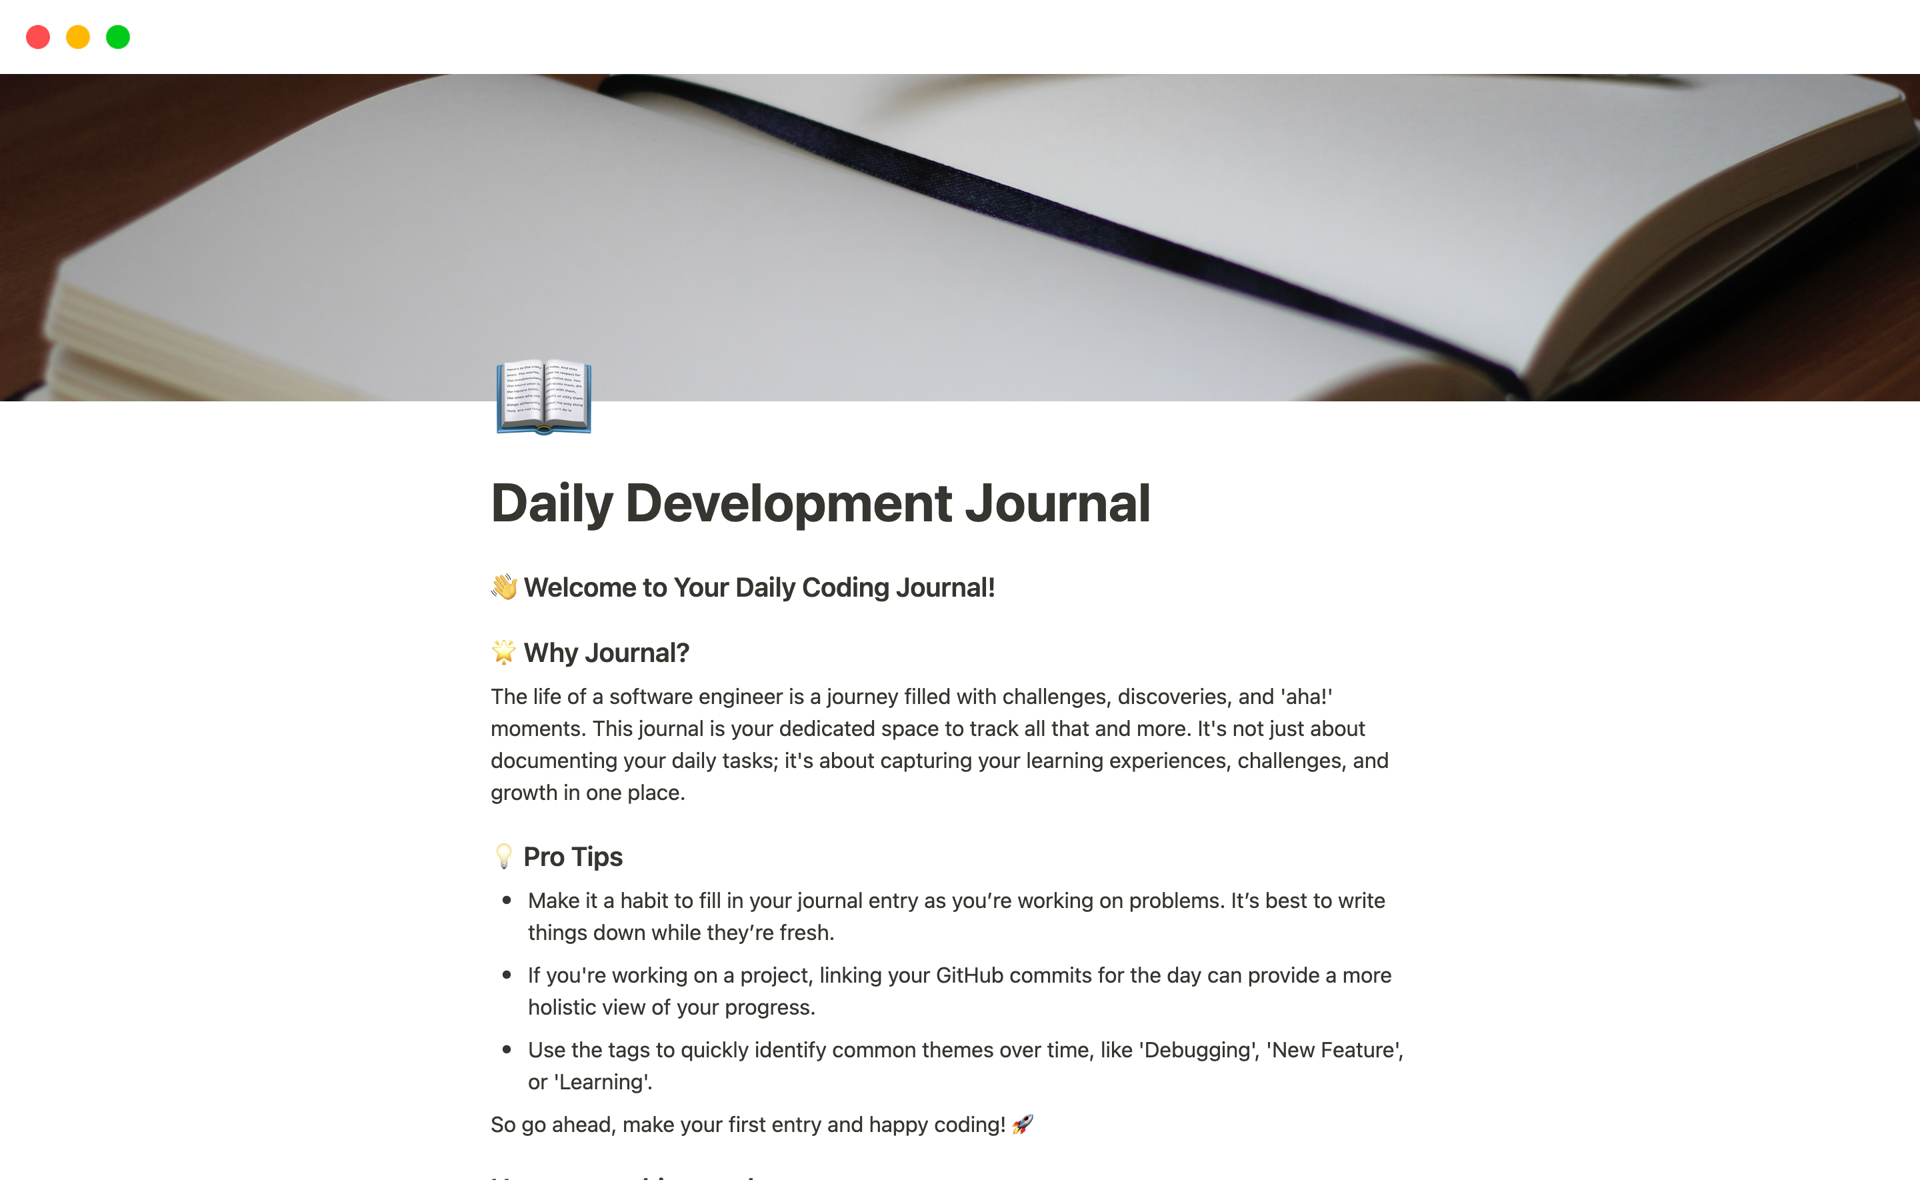 Track your daily development challenges, solutions, and learnings with this comprehensive journal template.